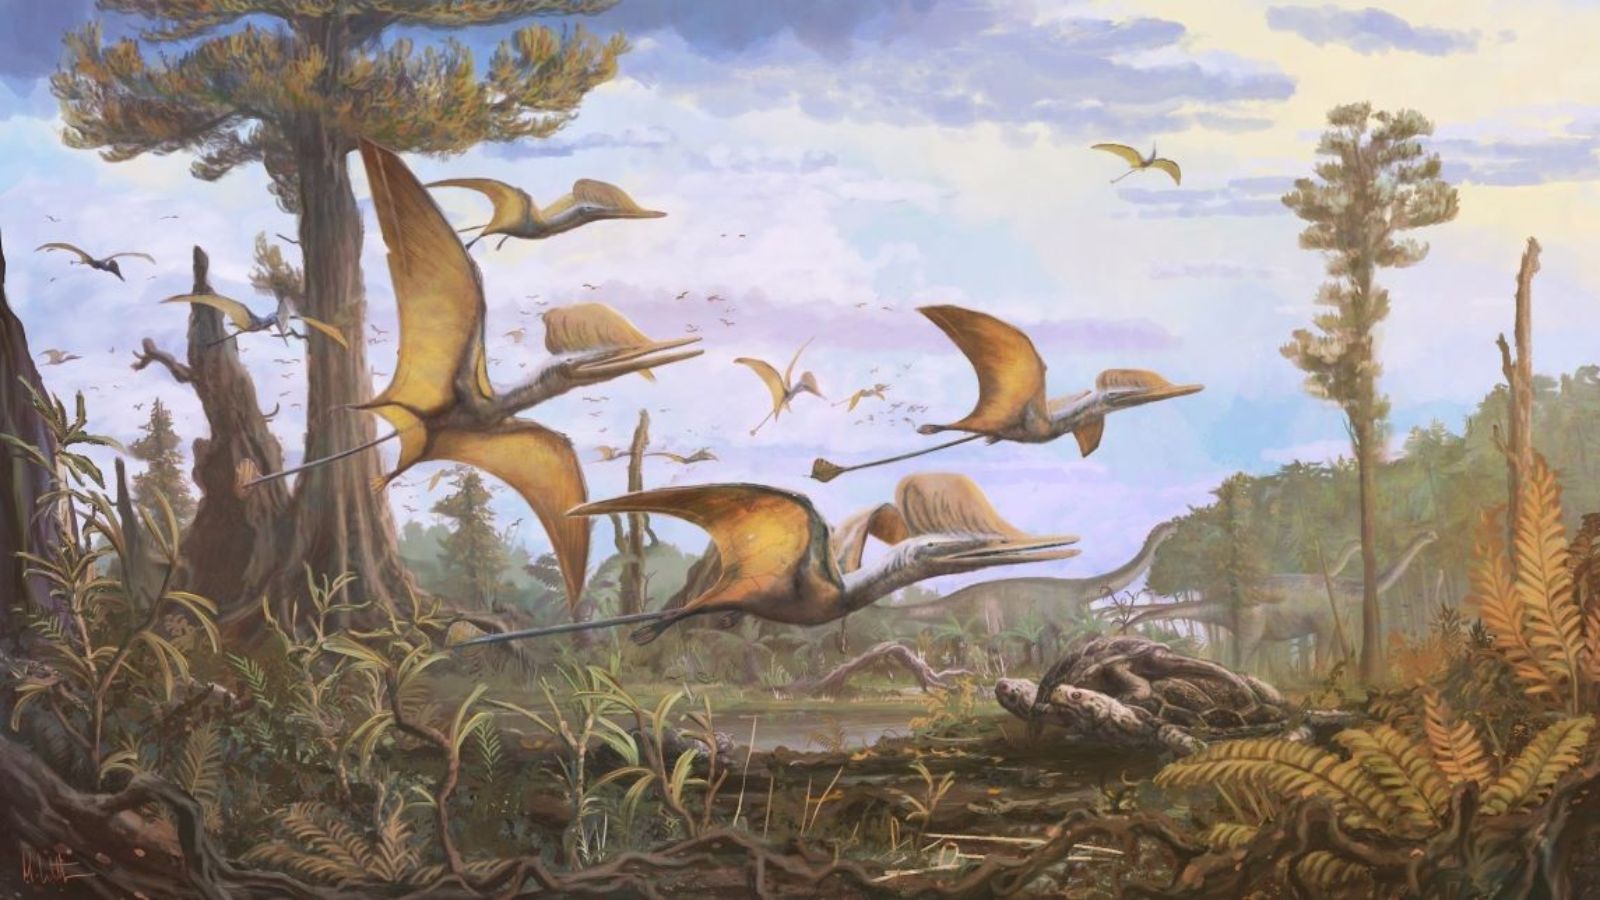 android, flying dinosaur fossil uncovered in scottish island has most relatives in china